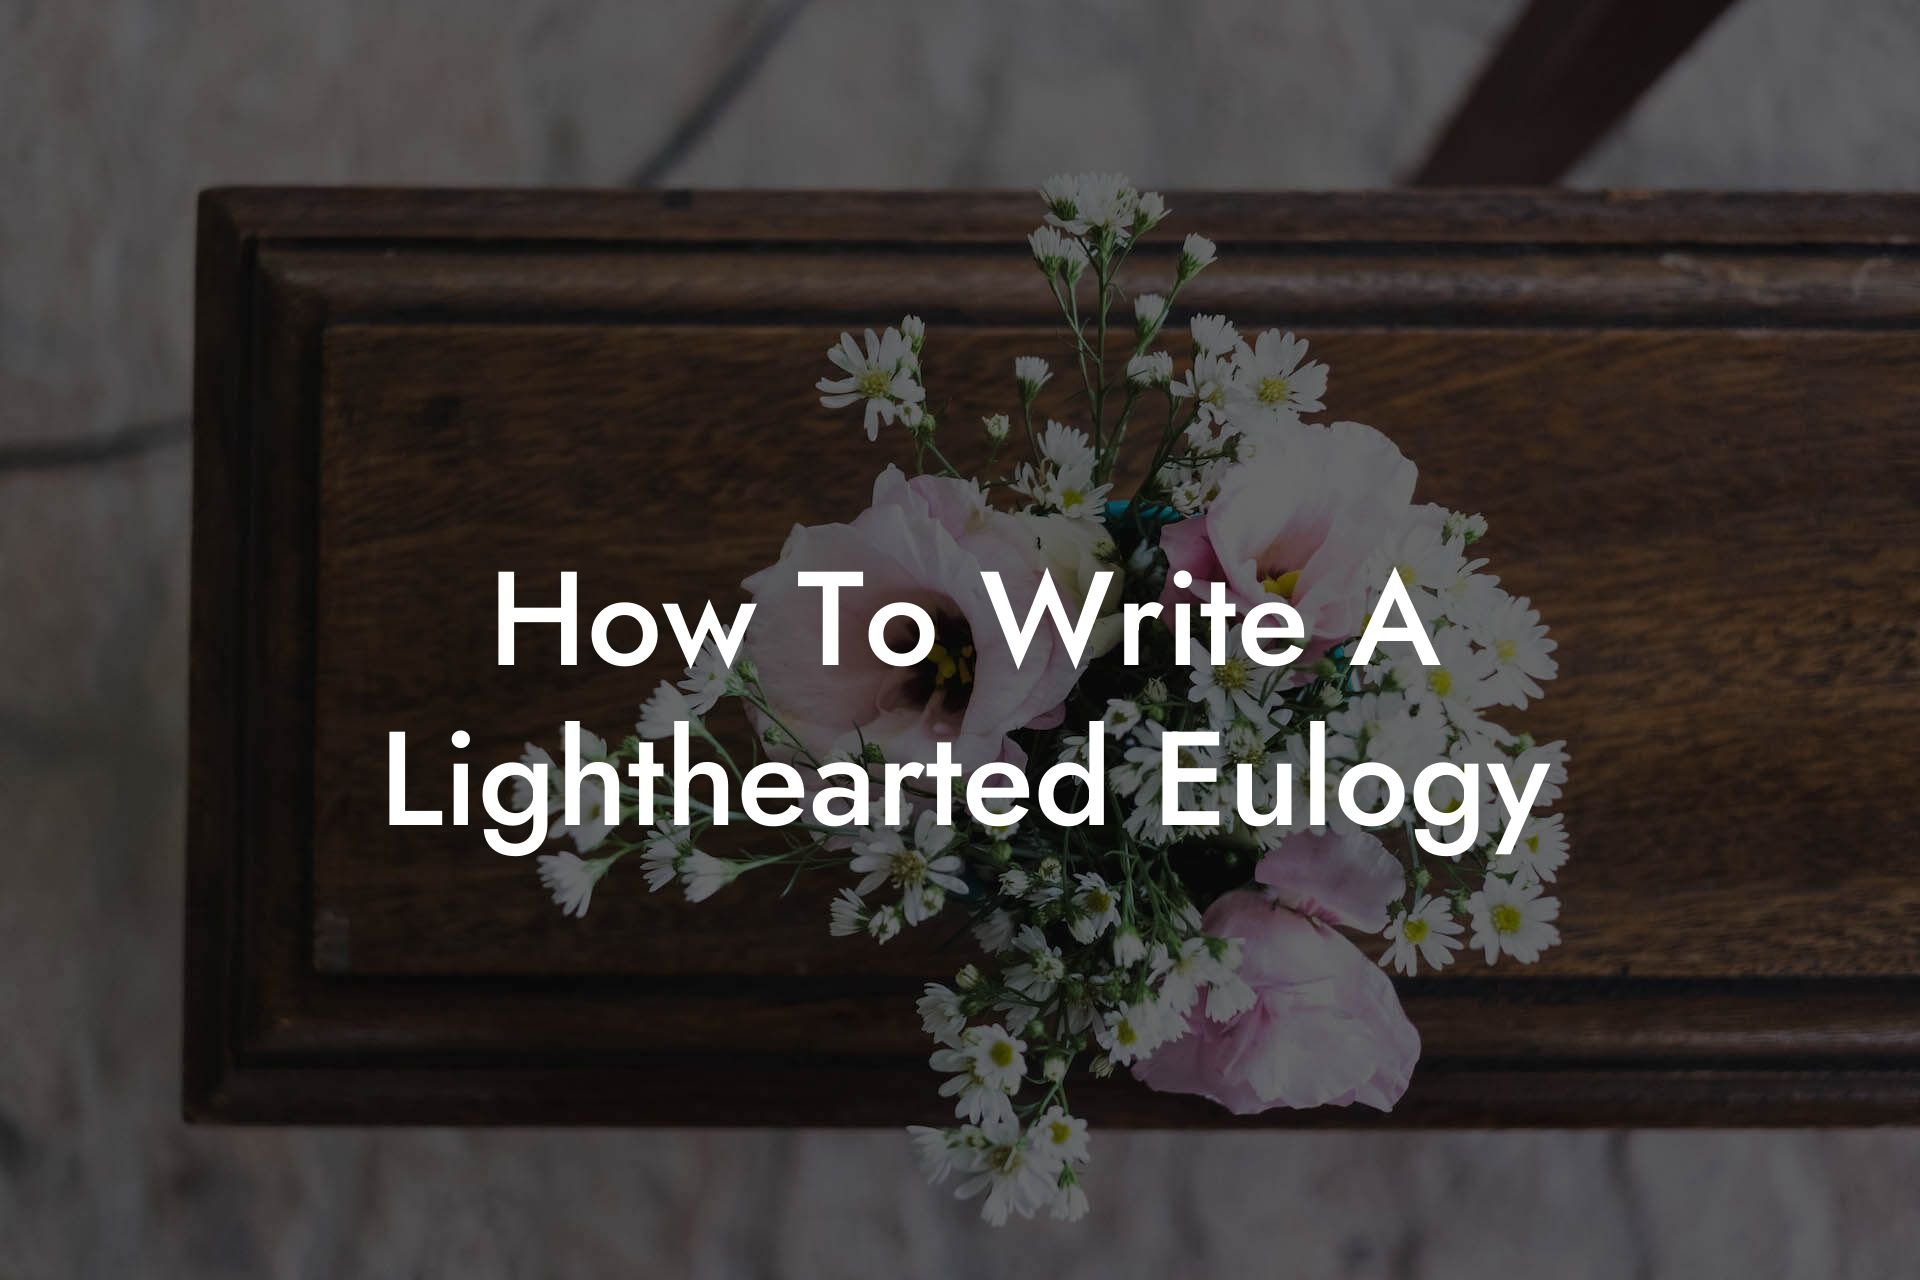 How To Write A Lighthearted Eulogy